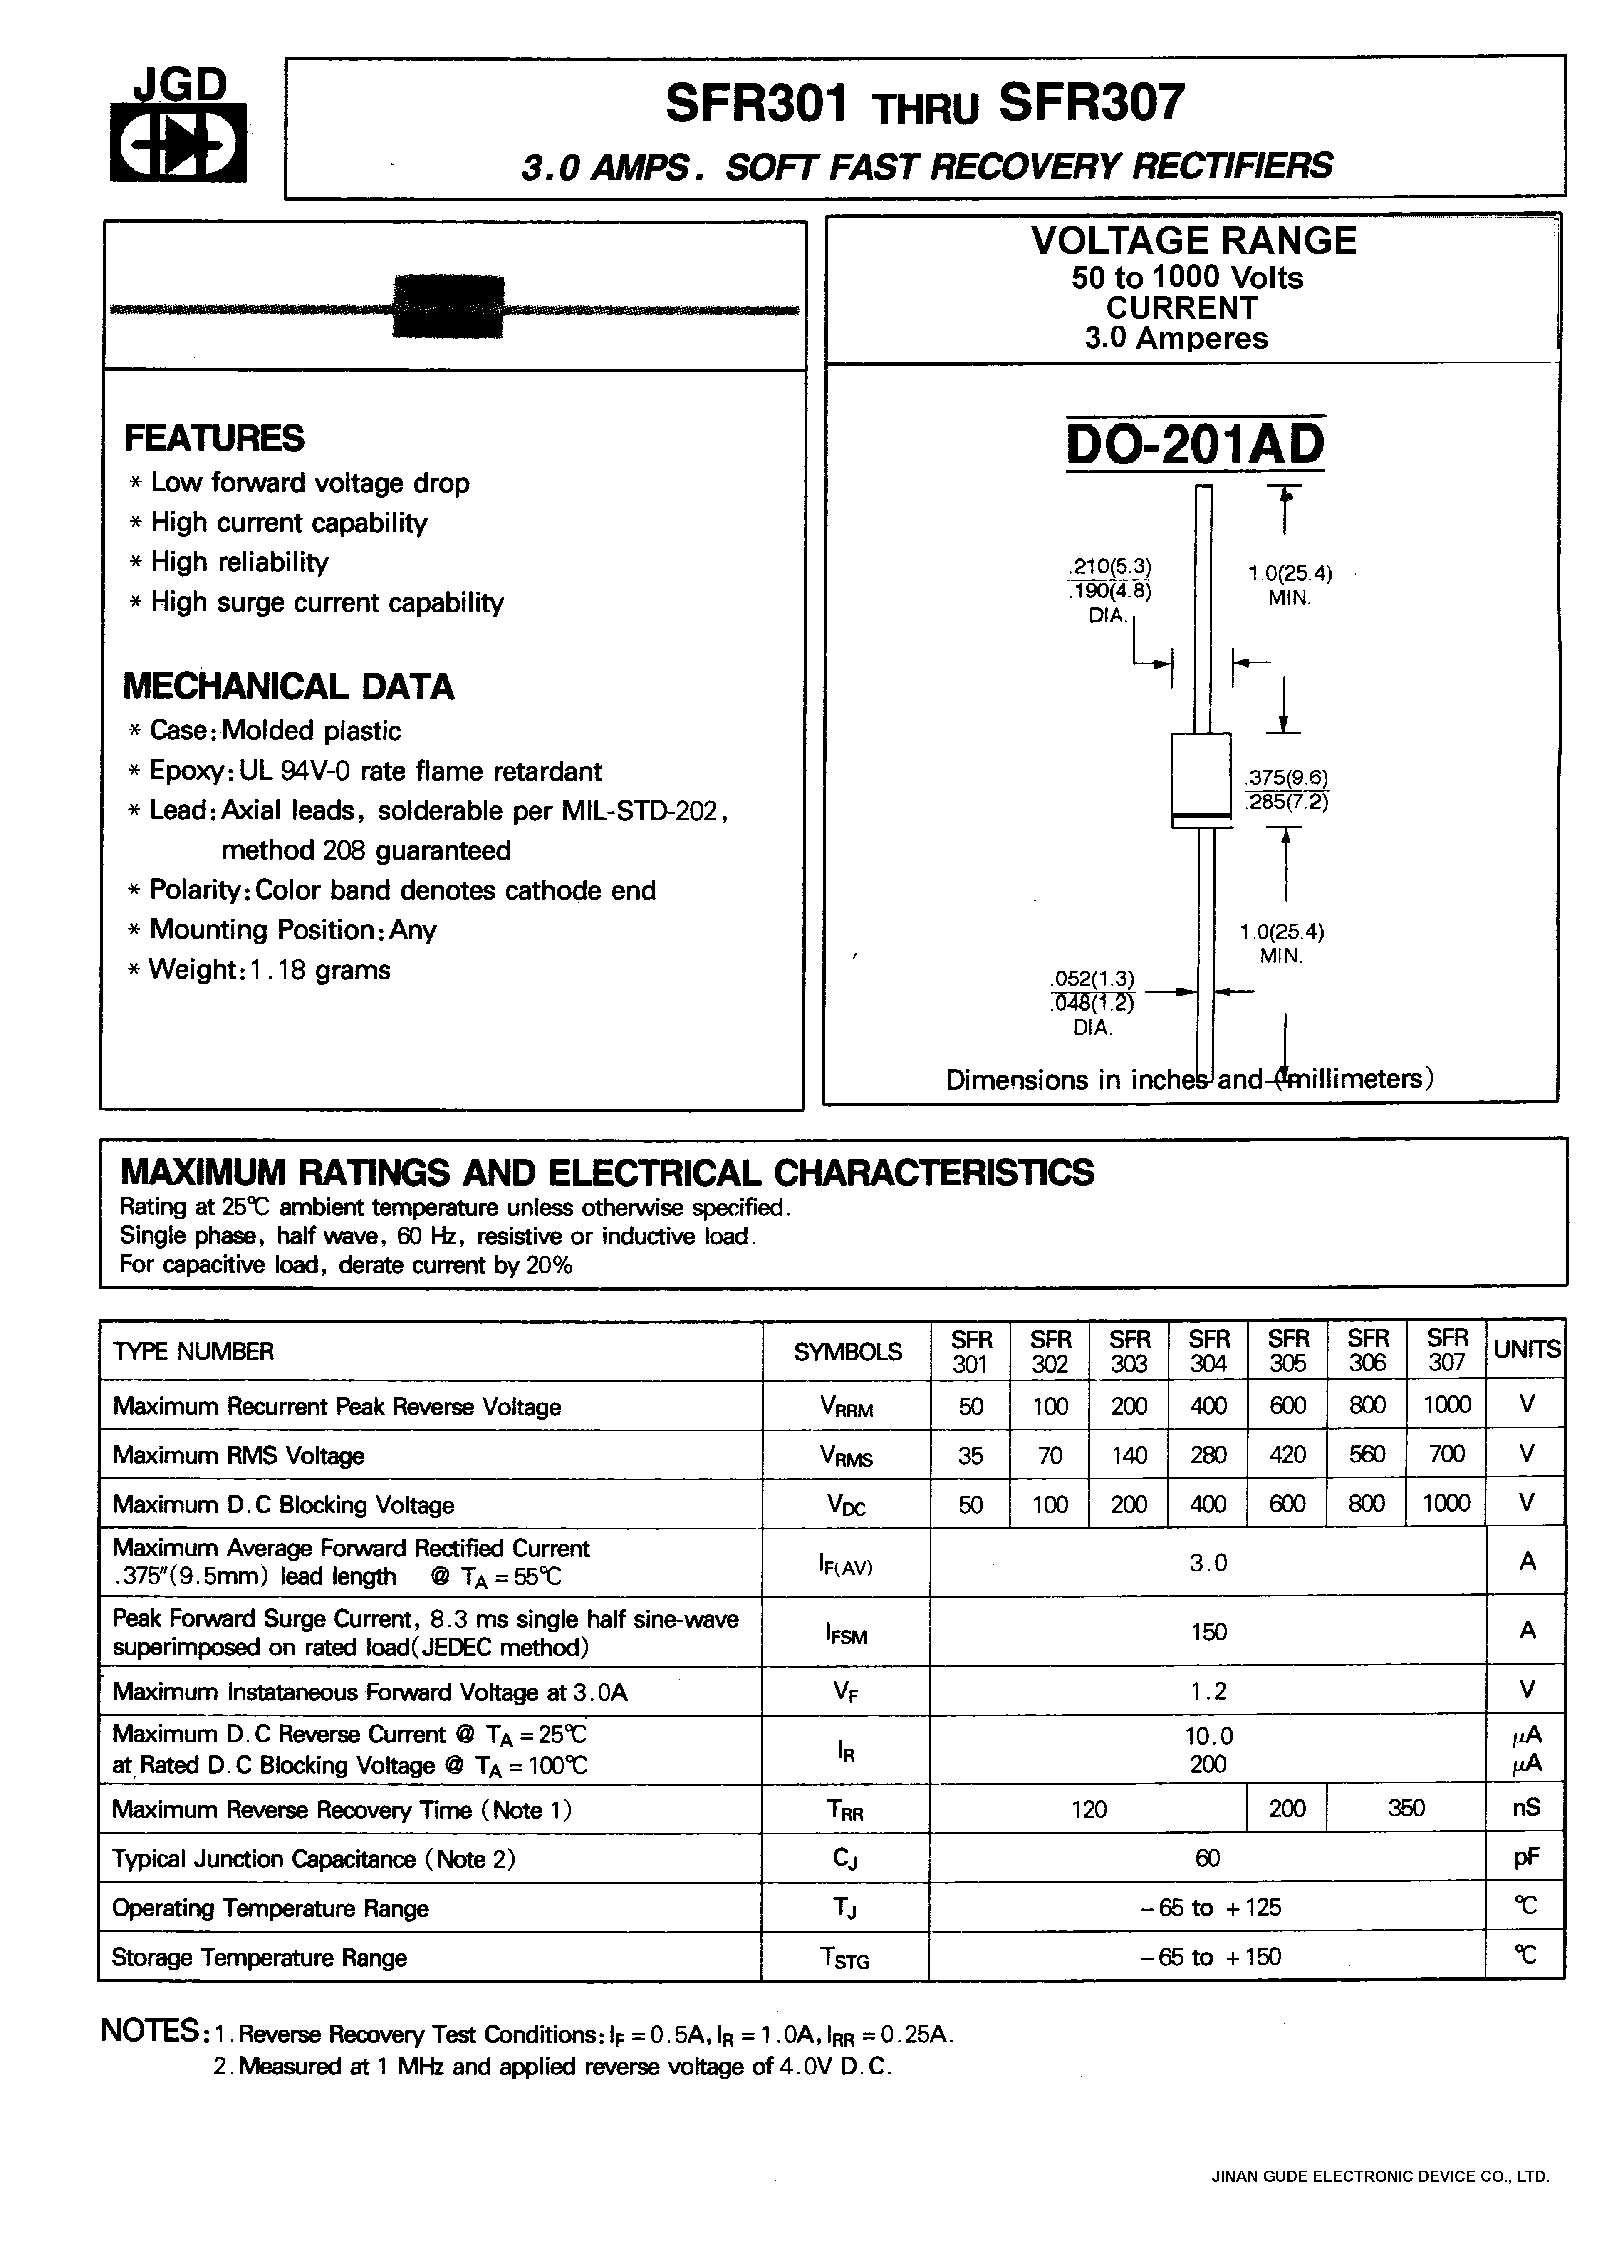 Datasheet SFR307 - 3.0 AMPS. SOFT FAST RECOVERY RECTIFIERS page 1